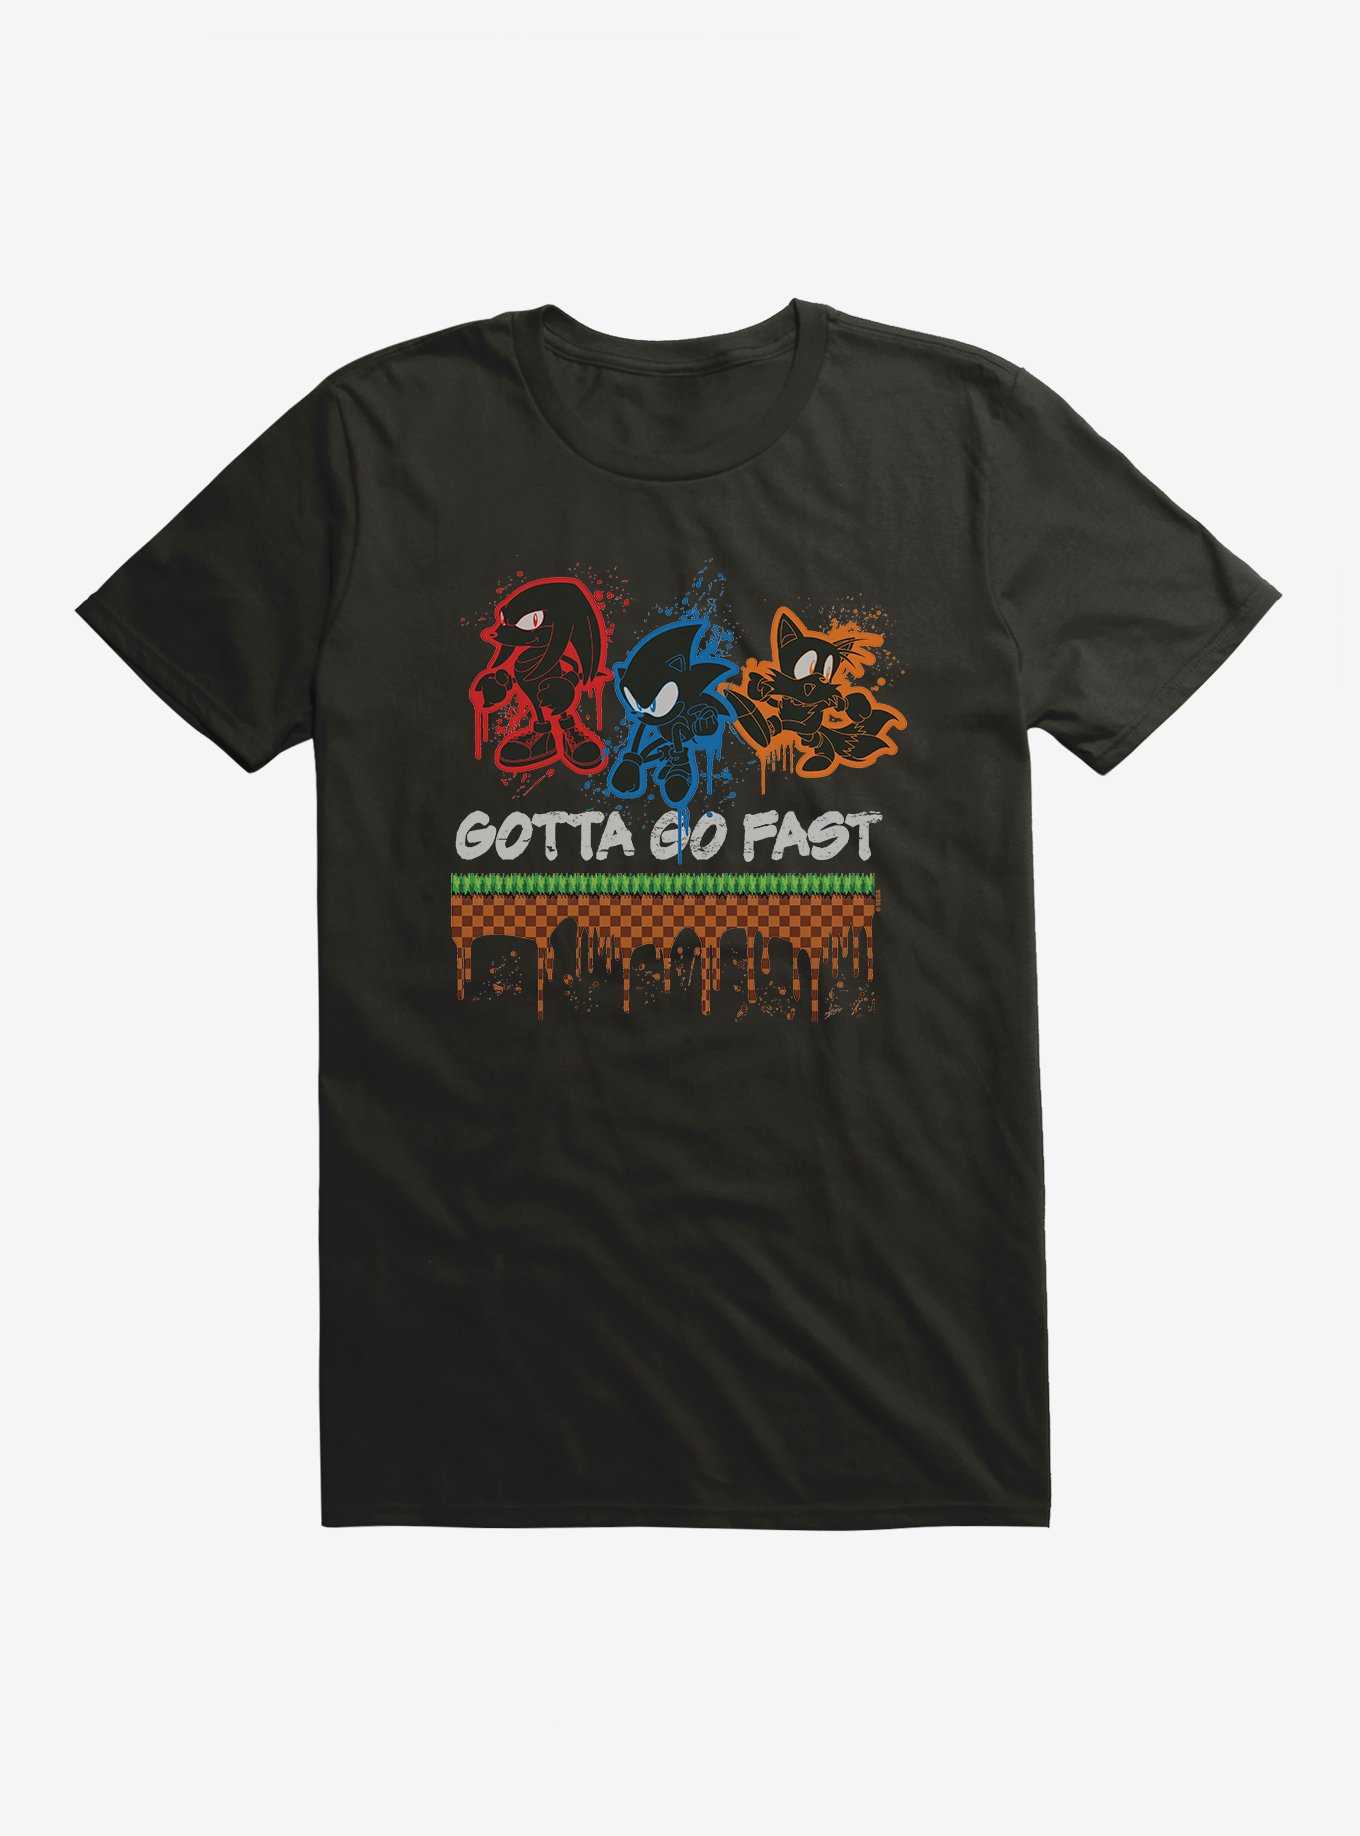 Sonic The Hedgehog Tails, Knuckles, And Sonic Gotta Go Fast! T-Shirt, , hi-res